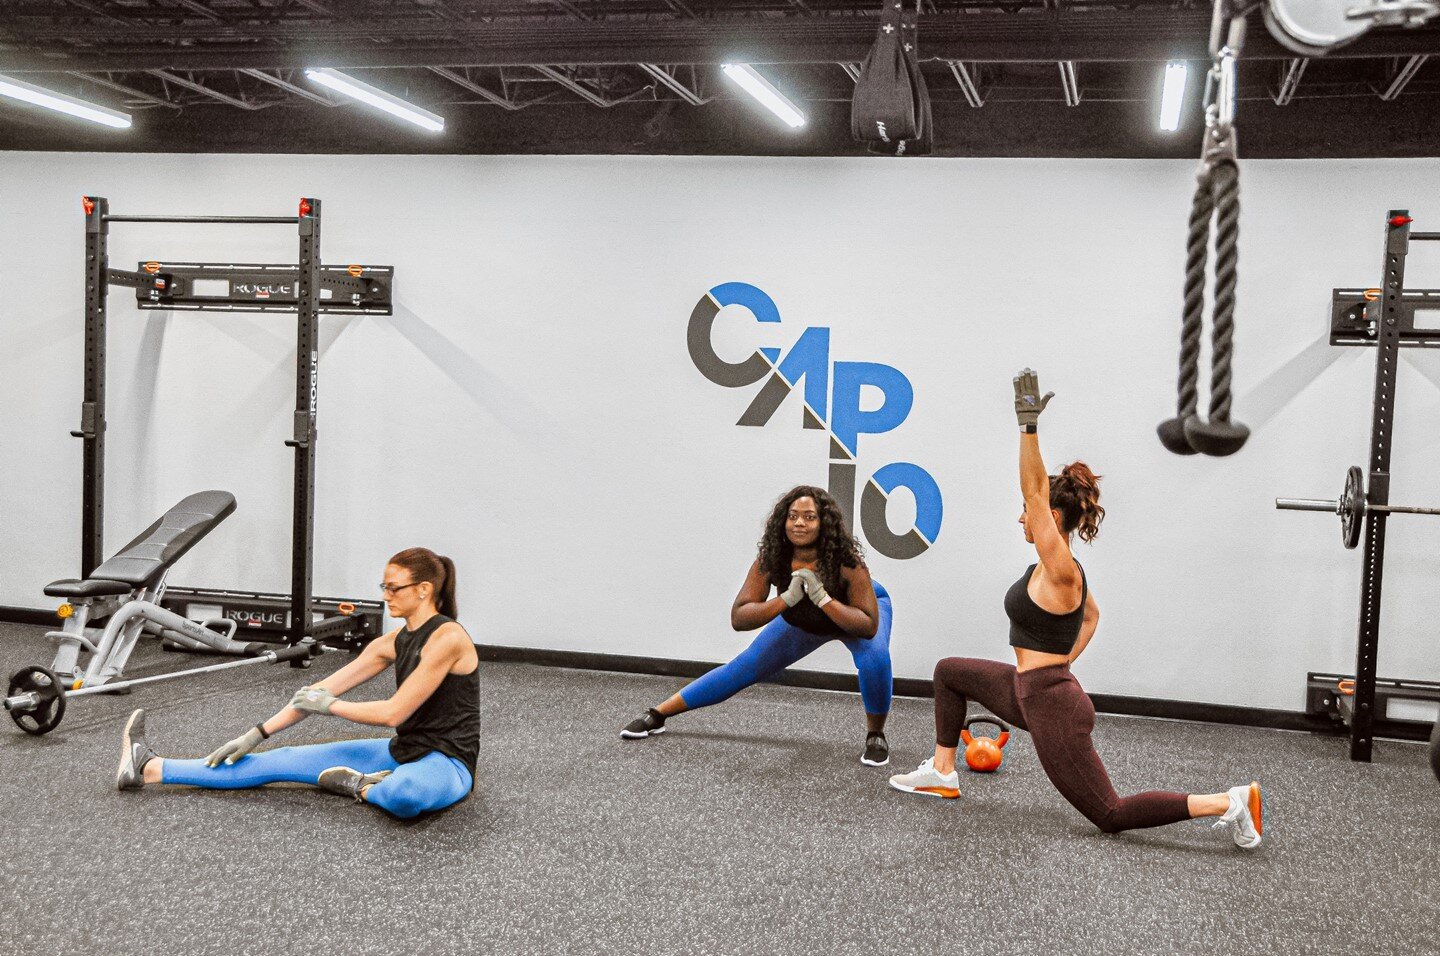 CAP 10 meets you where you are. We invite all levels! From beginners to fitness enthusiasts, we've got personalized training programs tailored to your needs and goals. ⁠
⁠
Are you interested in becoming a certified CAP 10 Trainer? Visit www.cap10gym.